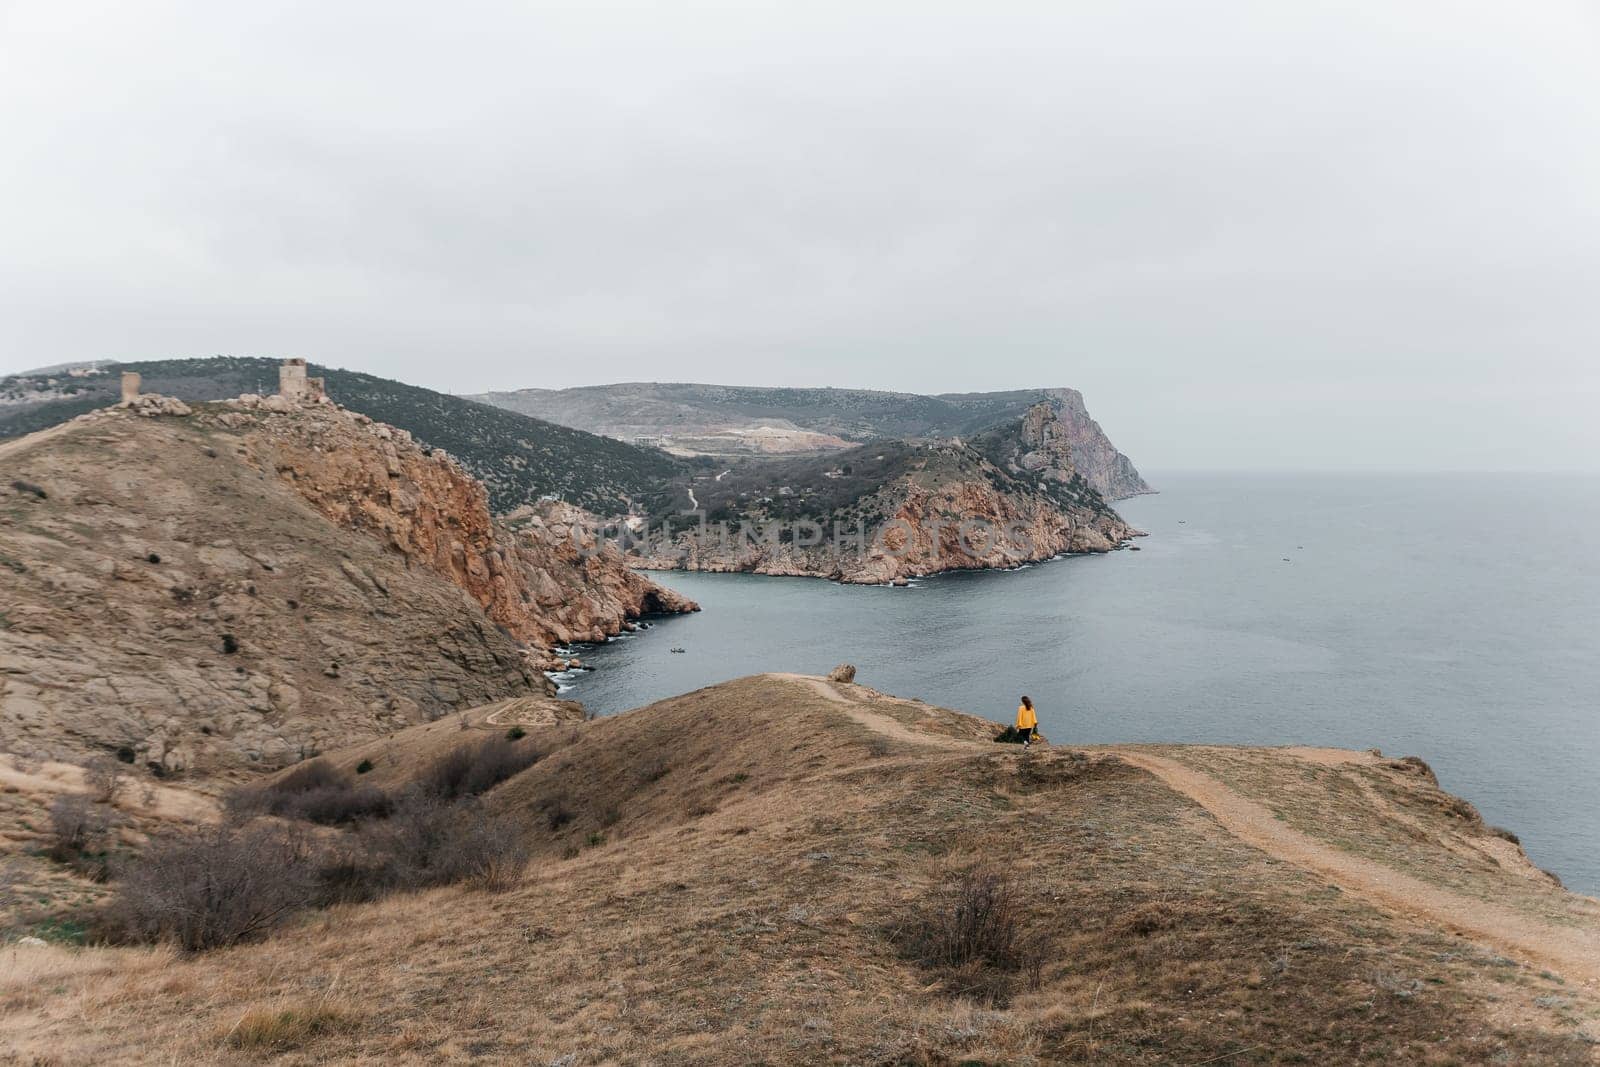 Woman stands on cliff overlooking ocean, cloudy day provides soft lighting. She's wearing a yellow sweater wearing dark pants. Landscape features rugged terrain, calm waters